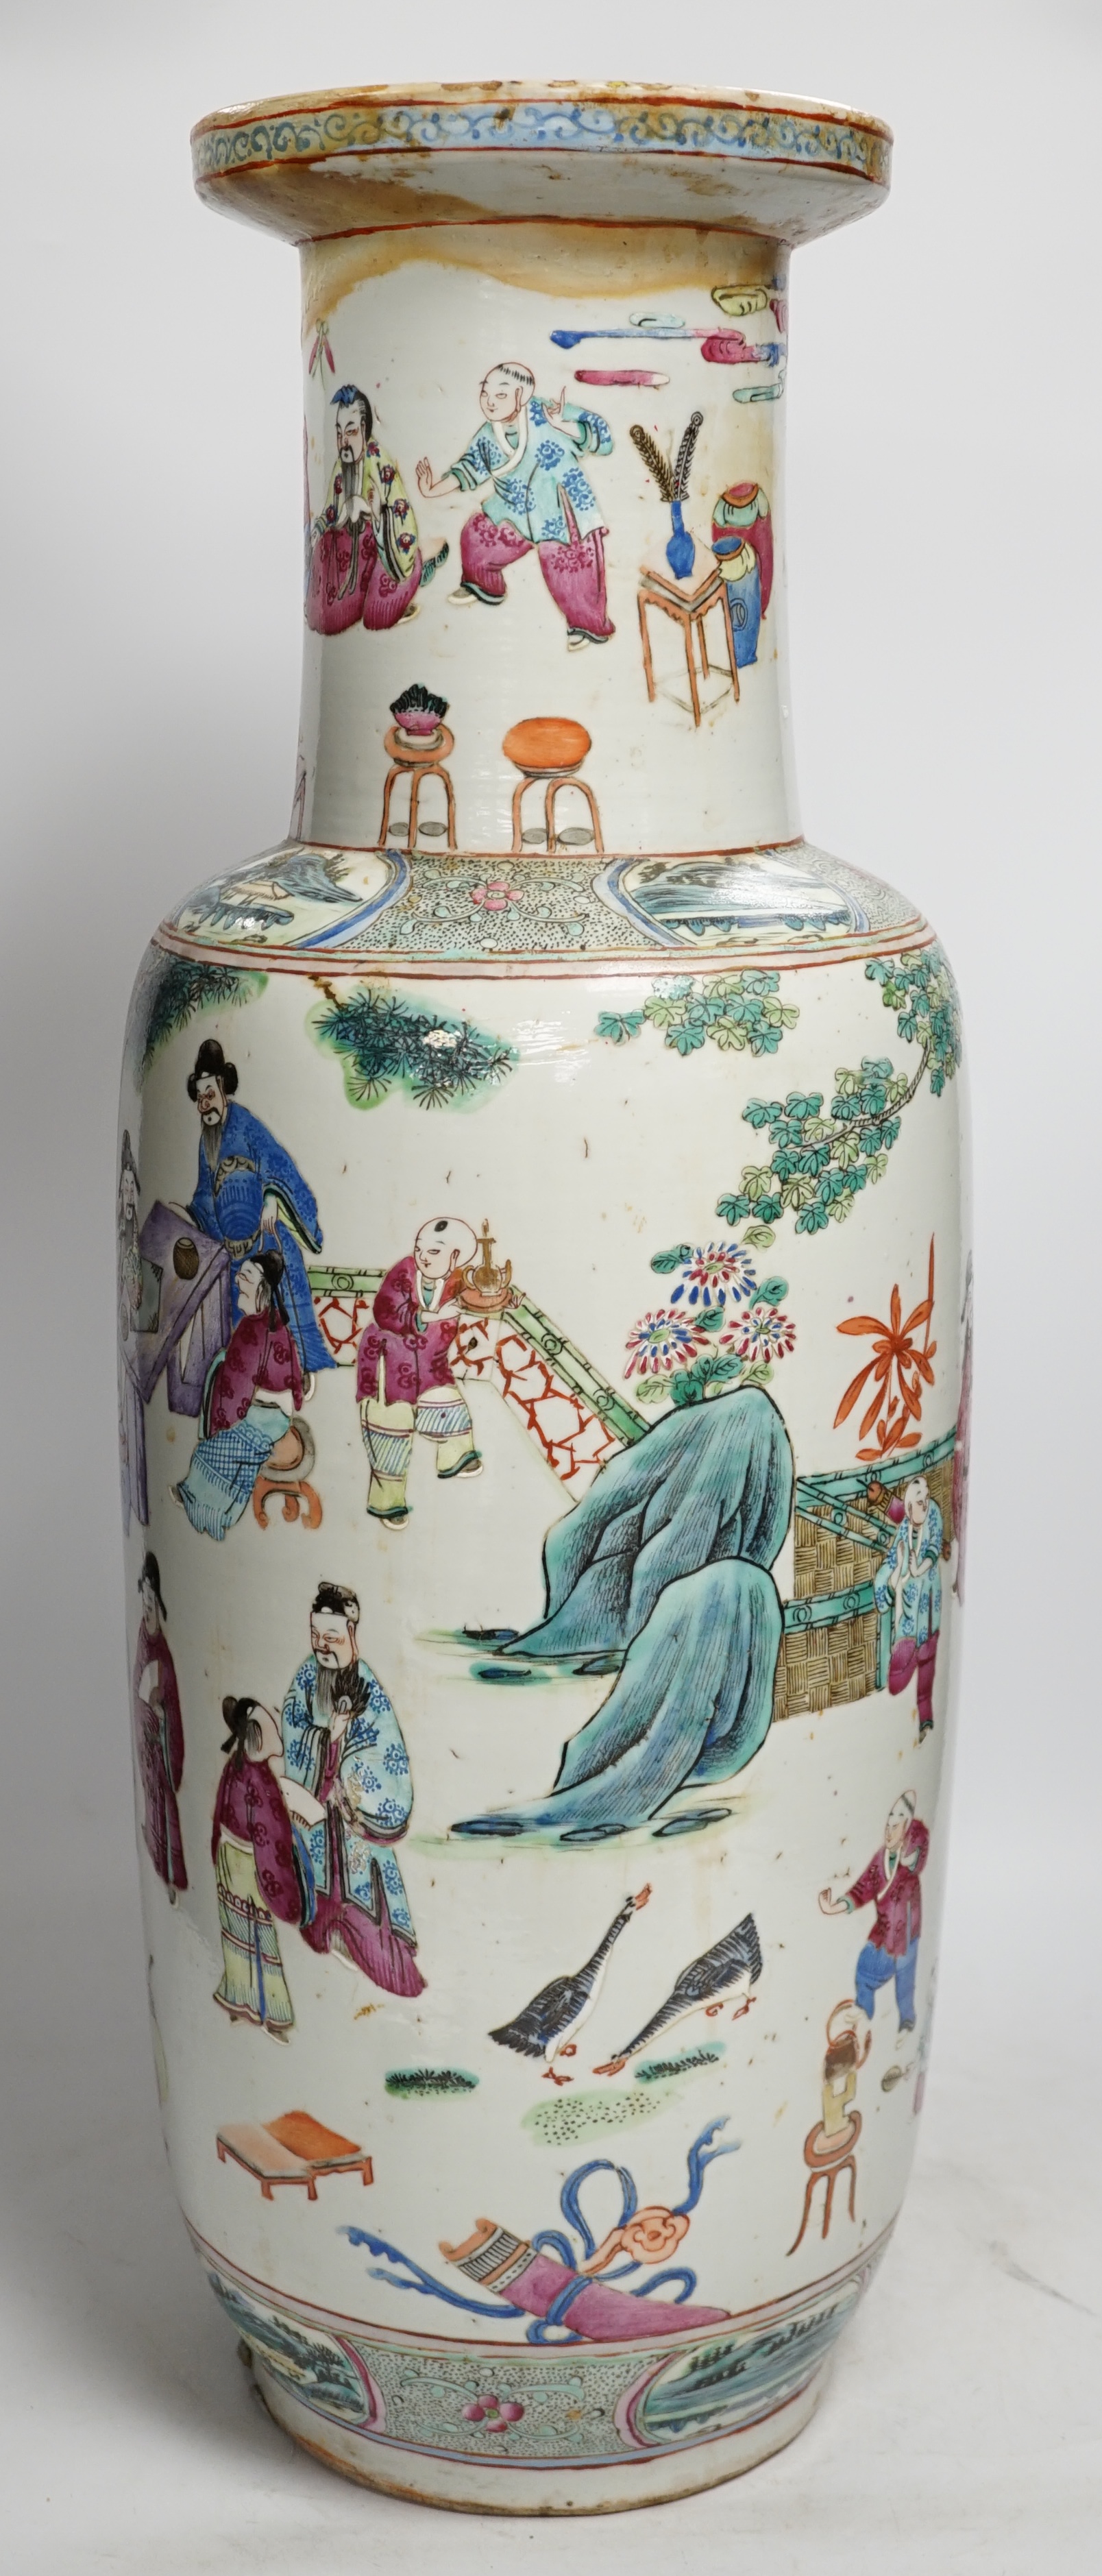 A large 19th century Chinese famille rose rouleau vase, 64cm. Condition - rim and neck have discoloured restored, otherwise fair